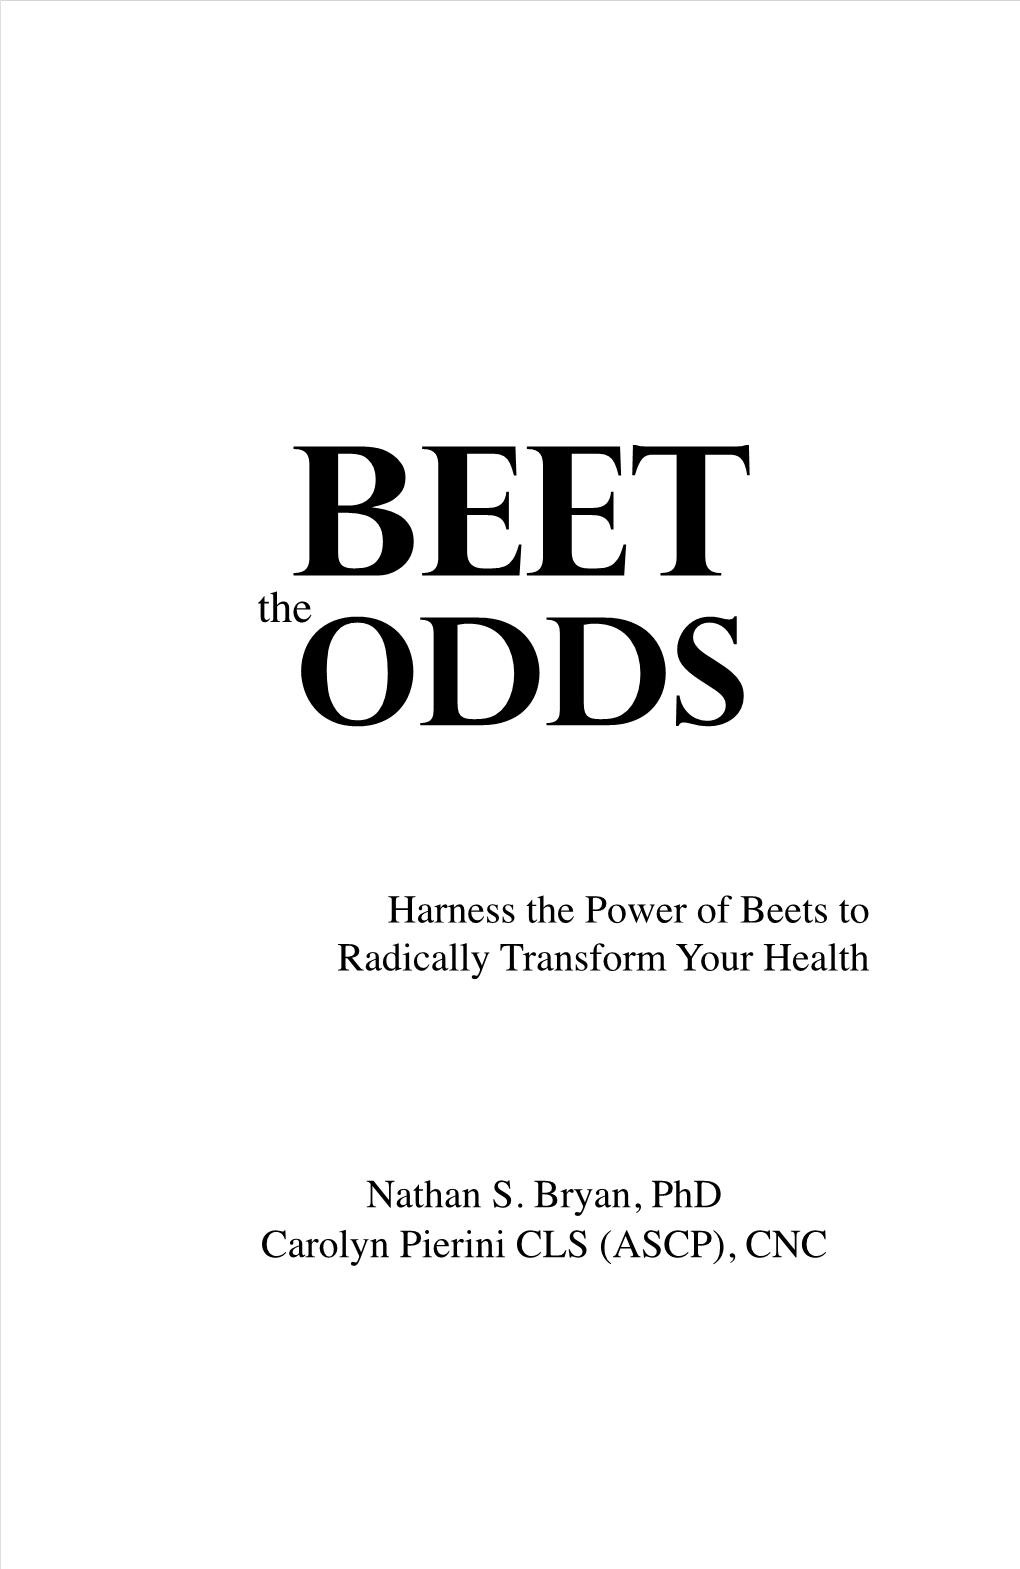 Harness the Power of Beets to Radically Transform